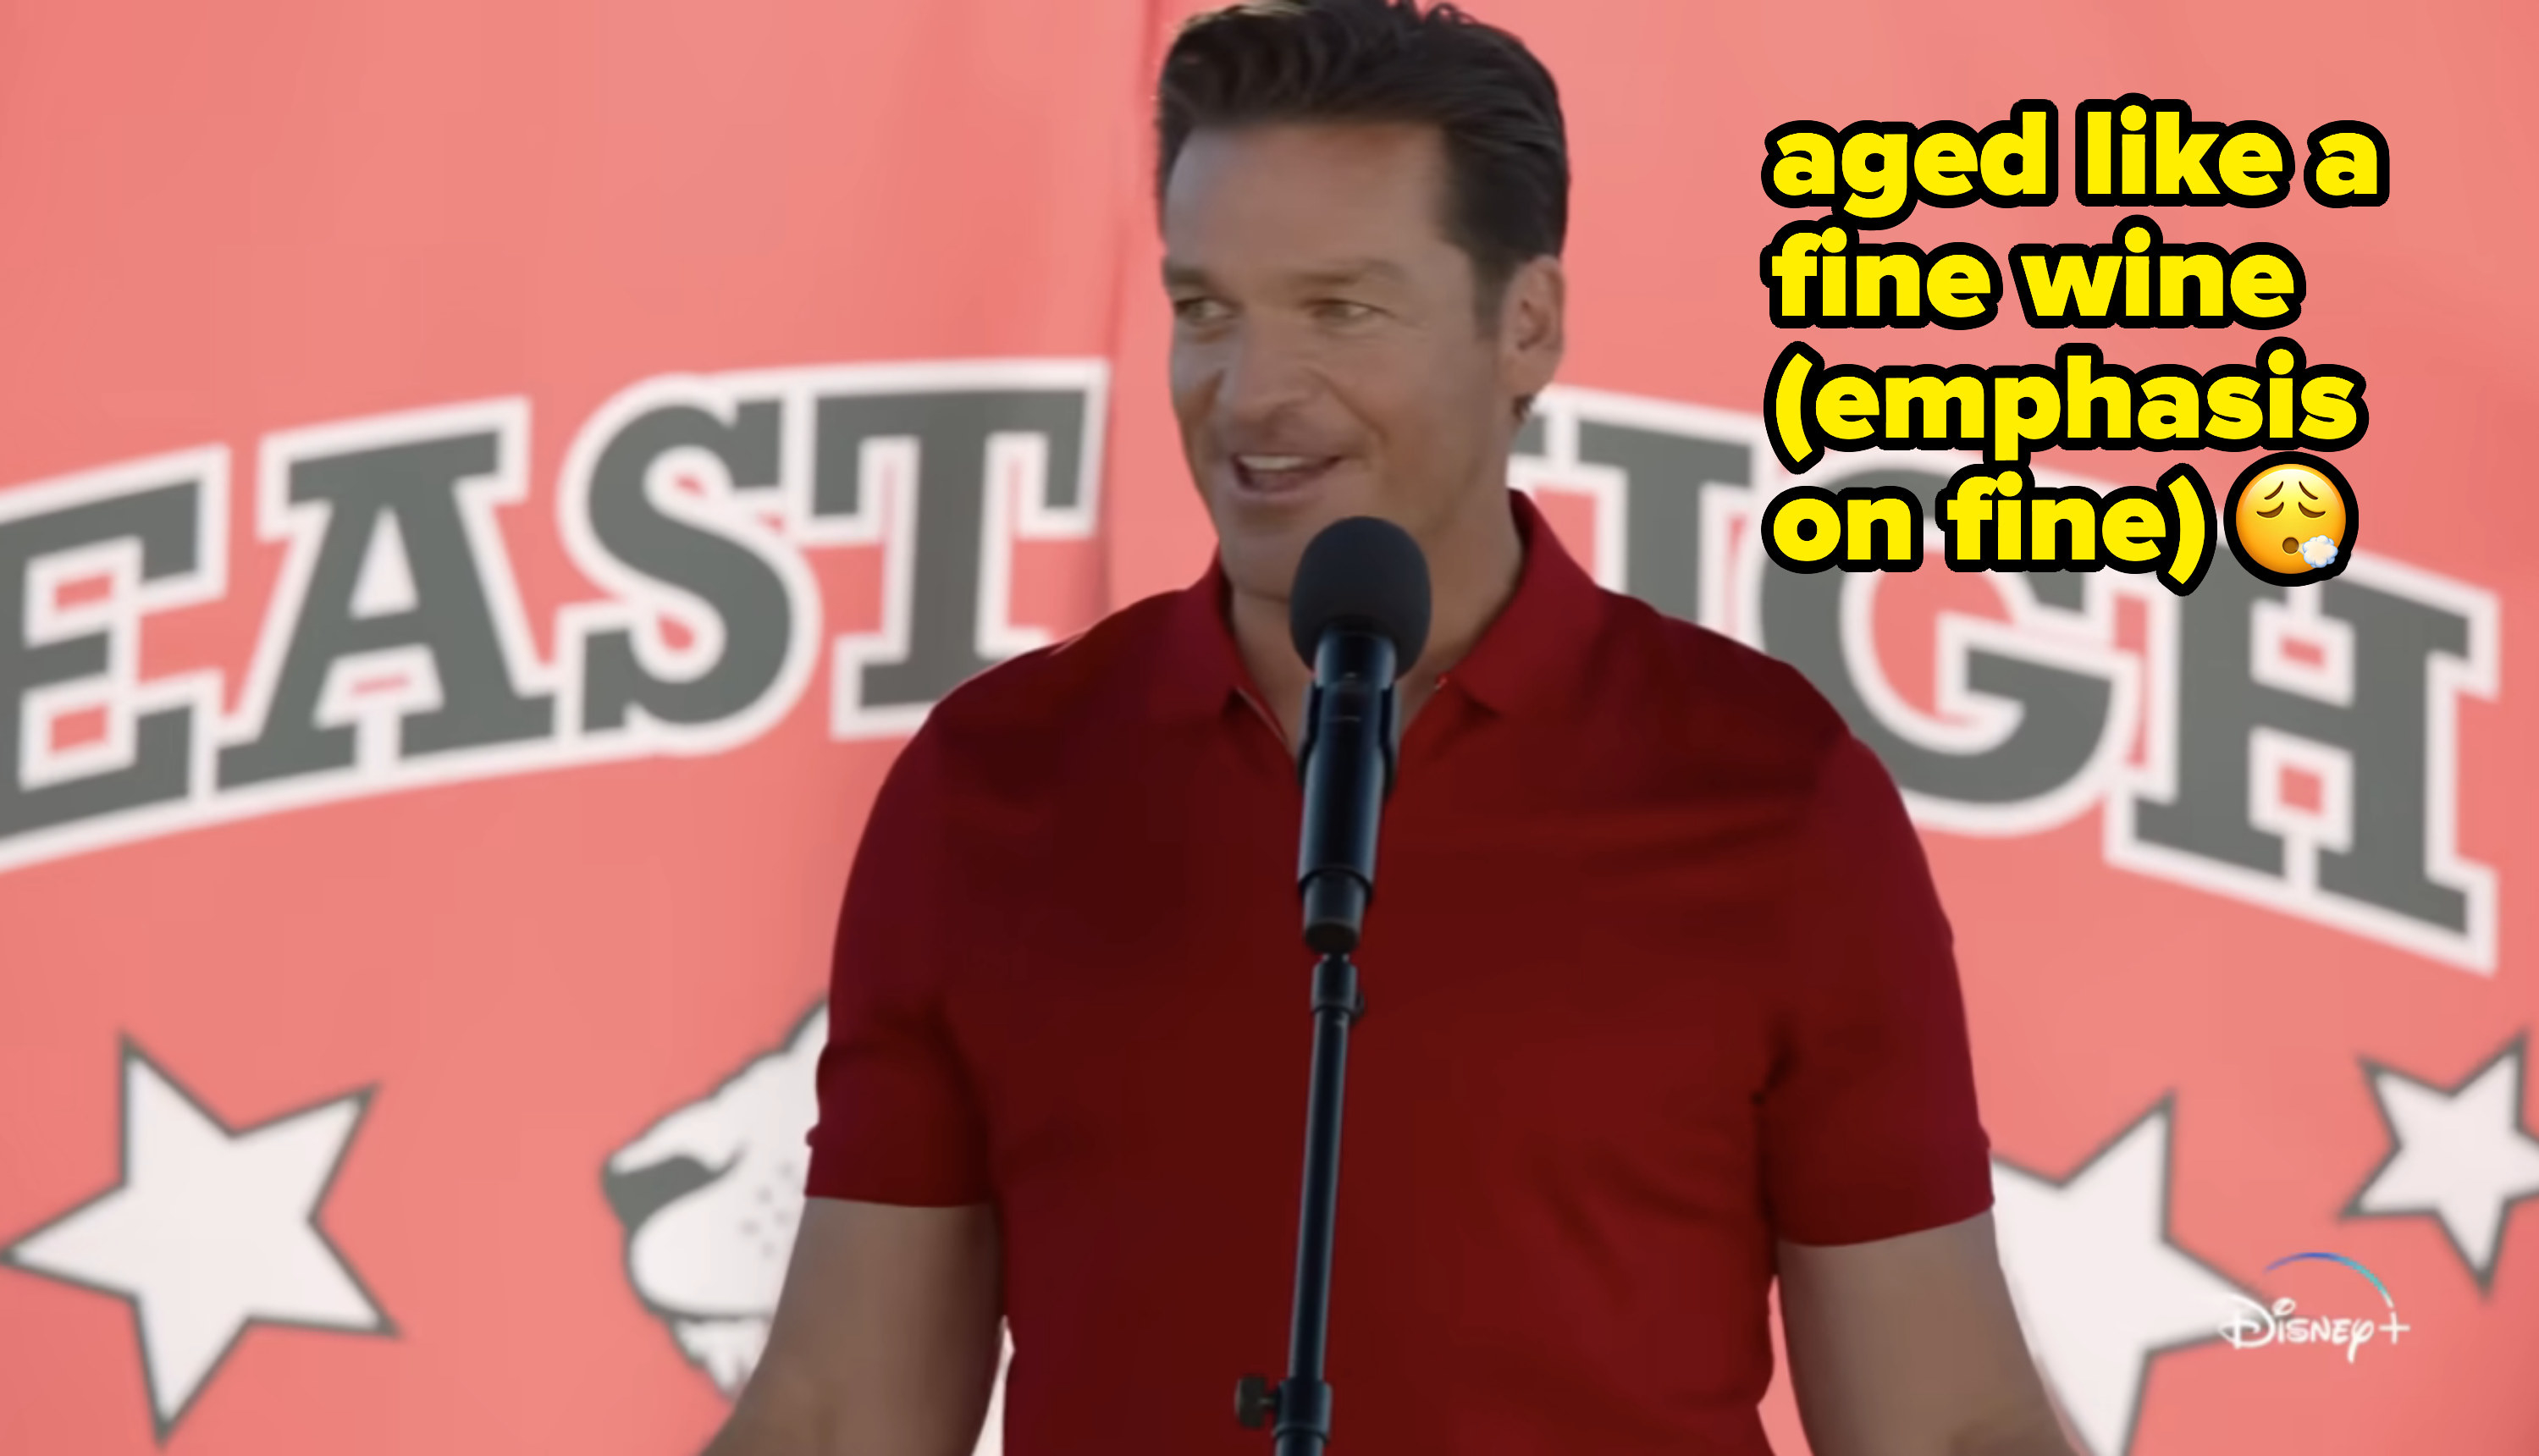 Bart Johnson as Coach Bolton in front of a microphone with caption, &quot;aged like a fine wine (emphasis on fine)&quot;